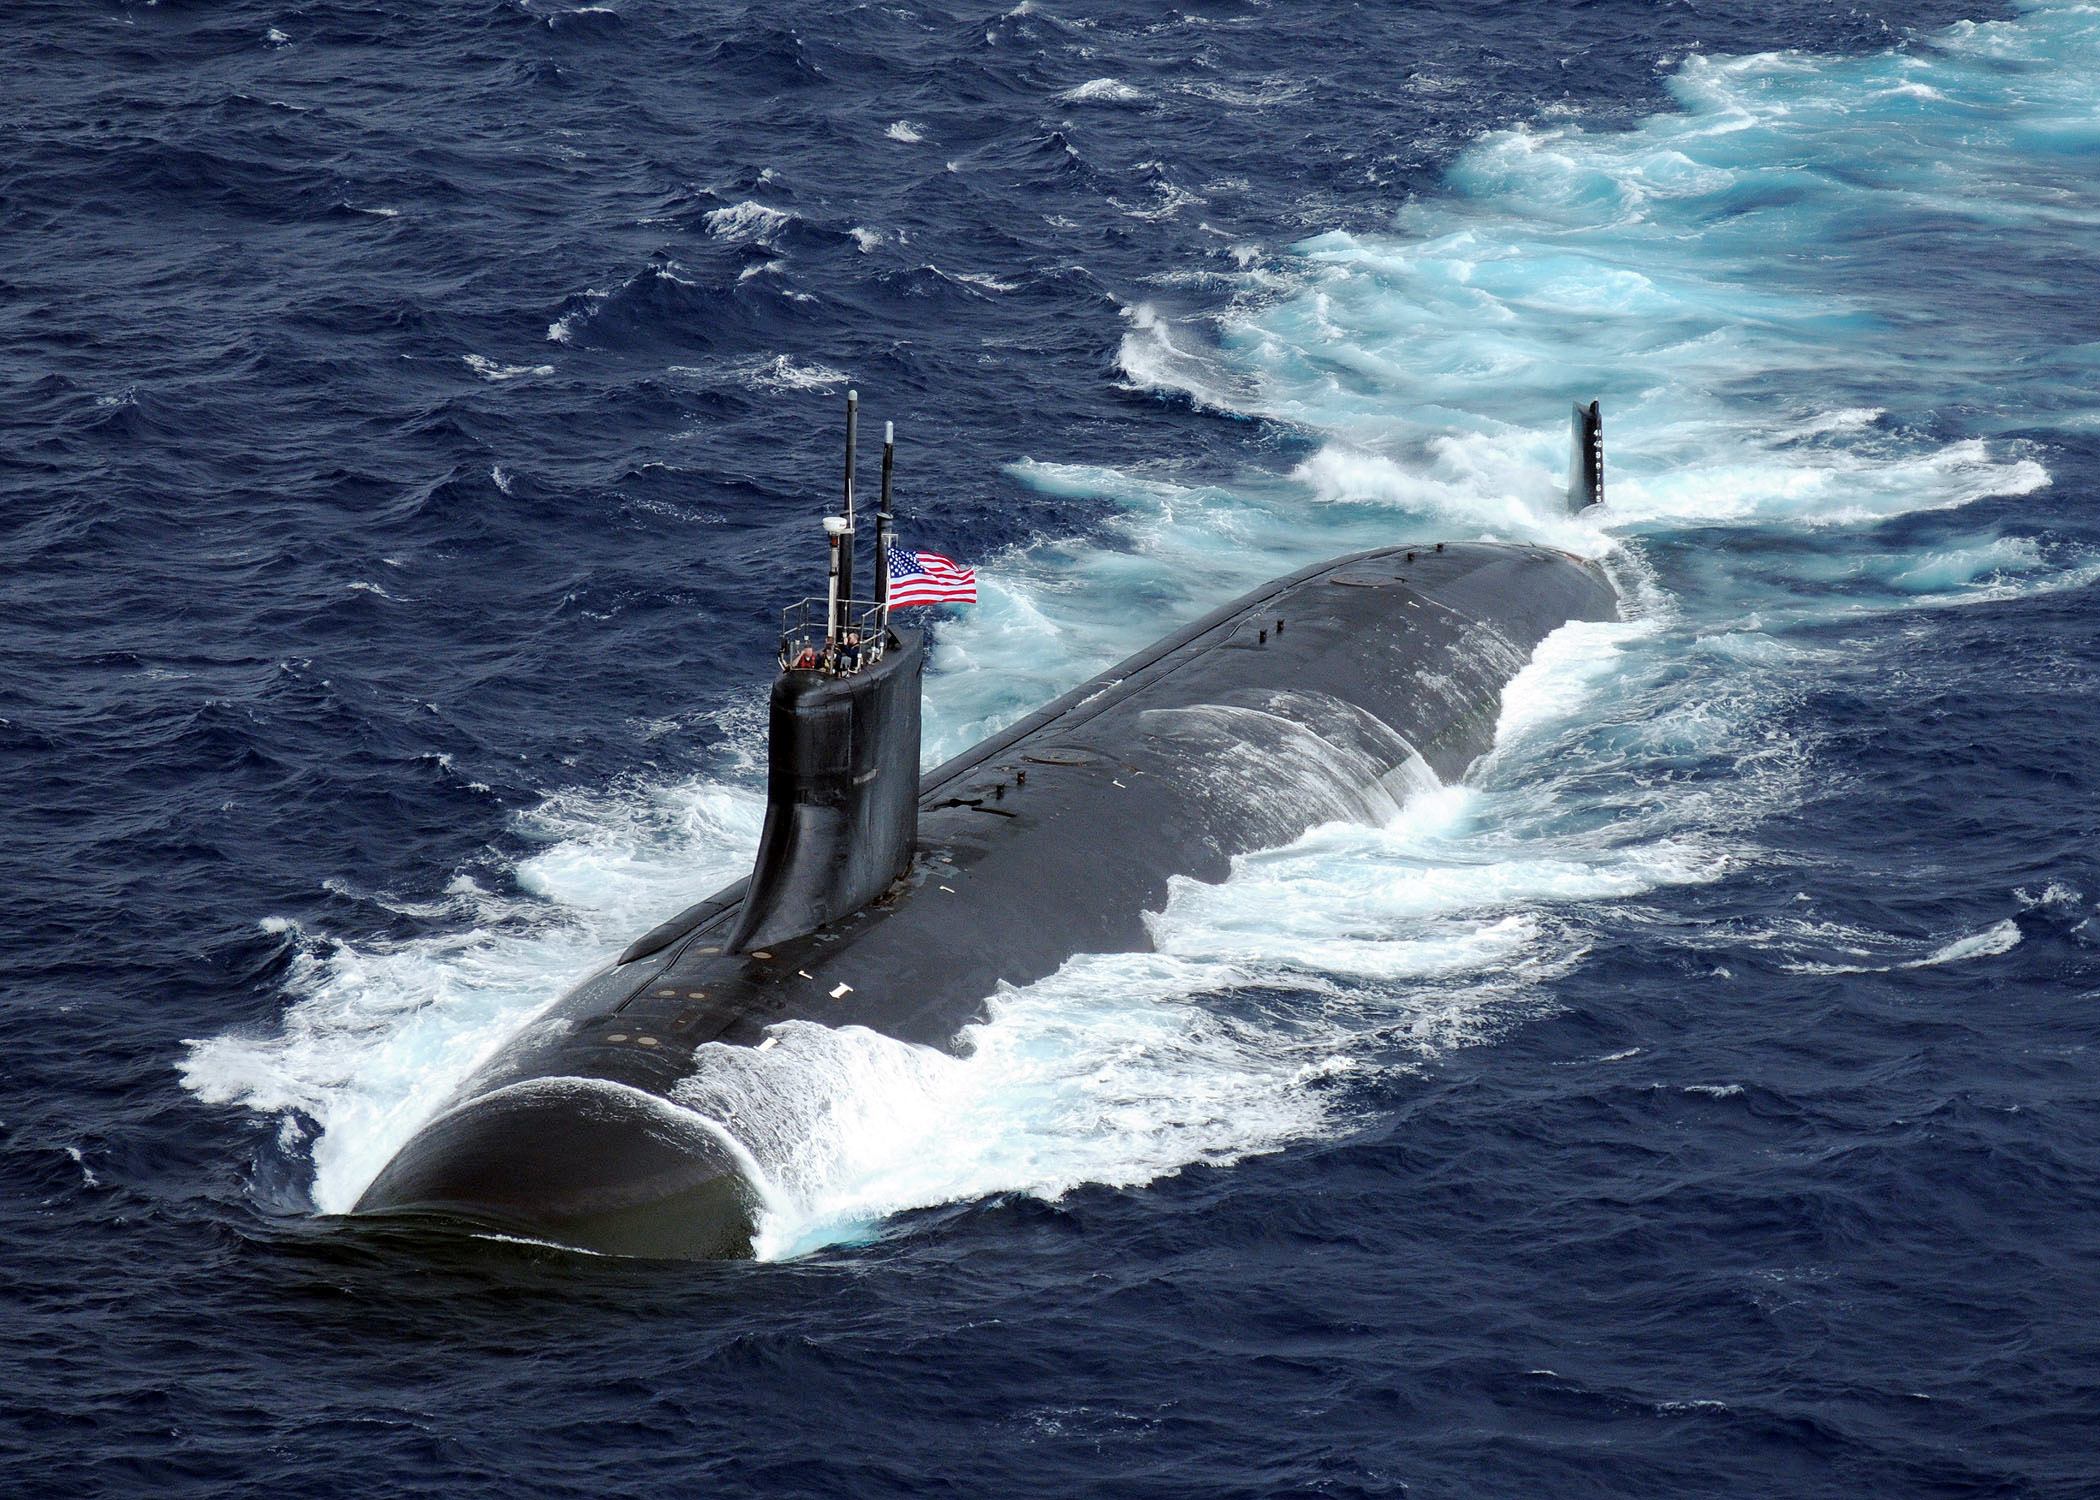 Sailors injured after nuclear submarine crashes into submerged object in the Pacific